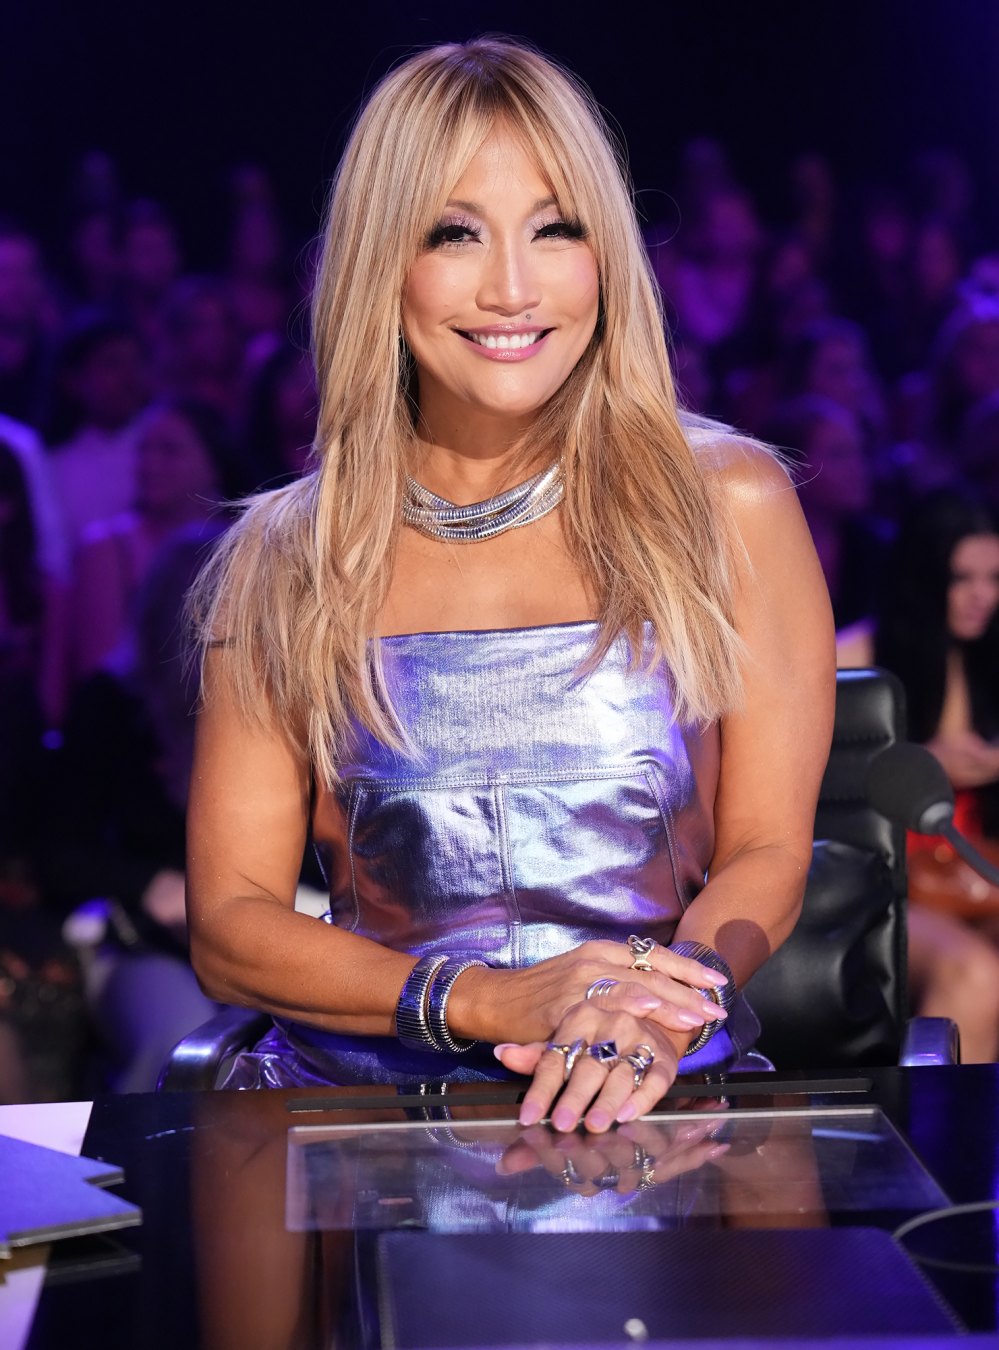 DWTS’ Carrie Ann Inaba Says She Has to ‘Fight Harder’ to Be Heard as the Only Female Judge